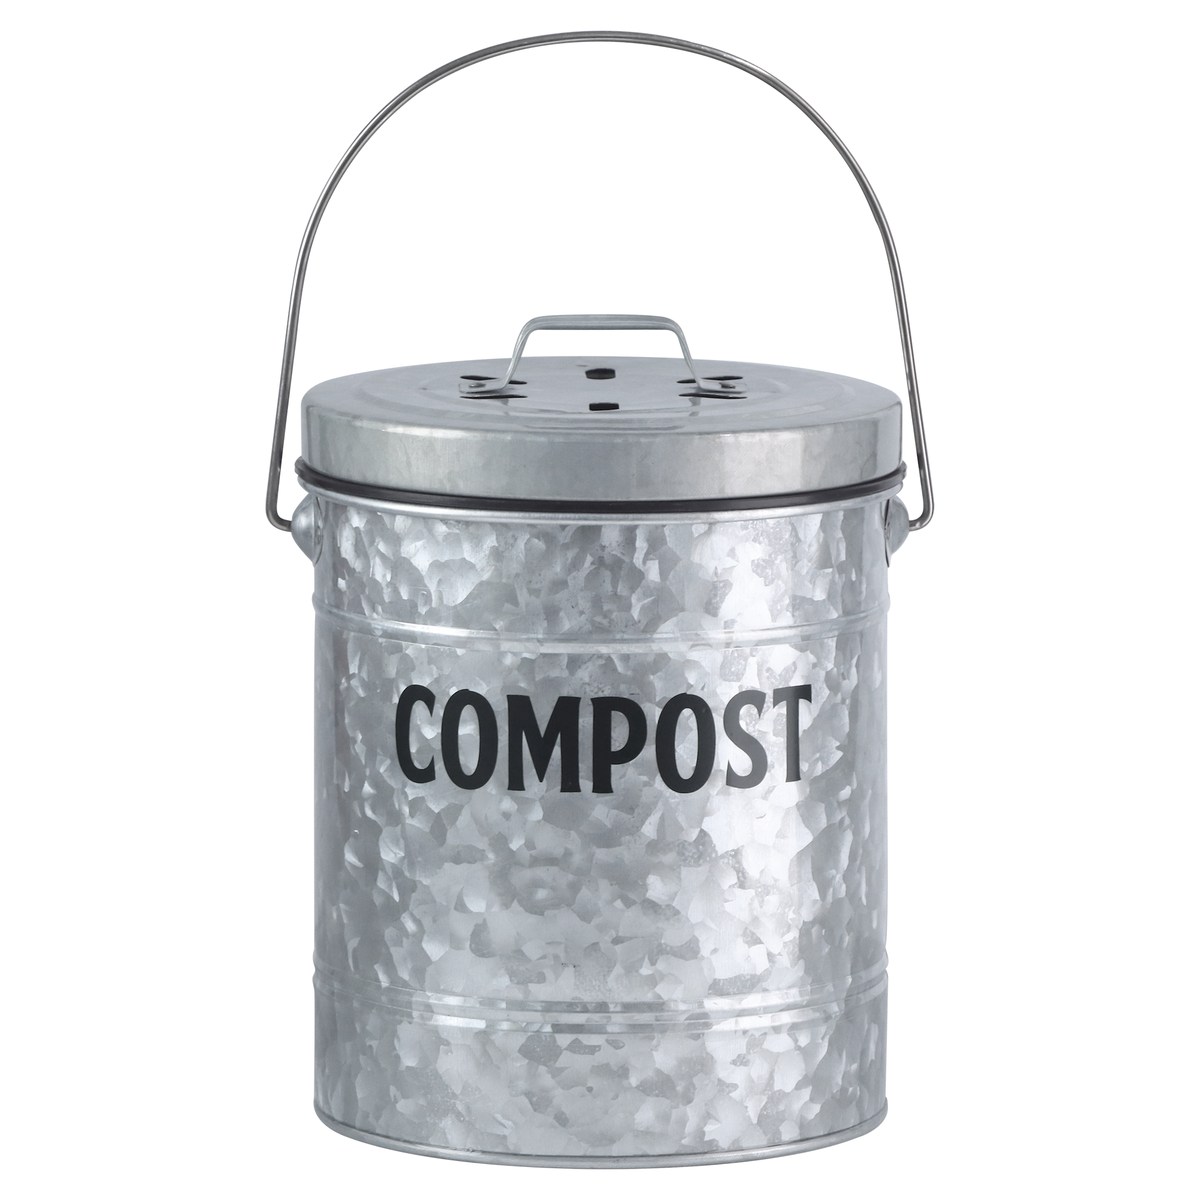 Stainless Steel Compost Bin - Grappa Lane